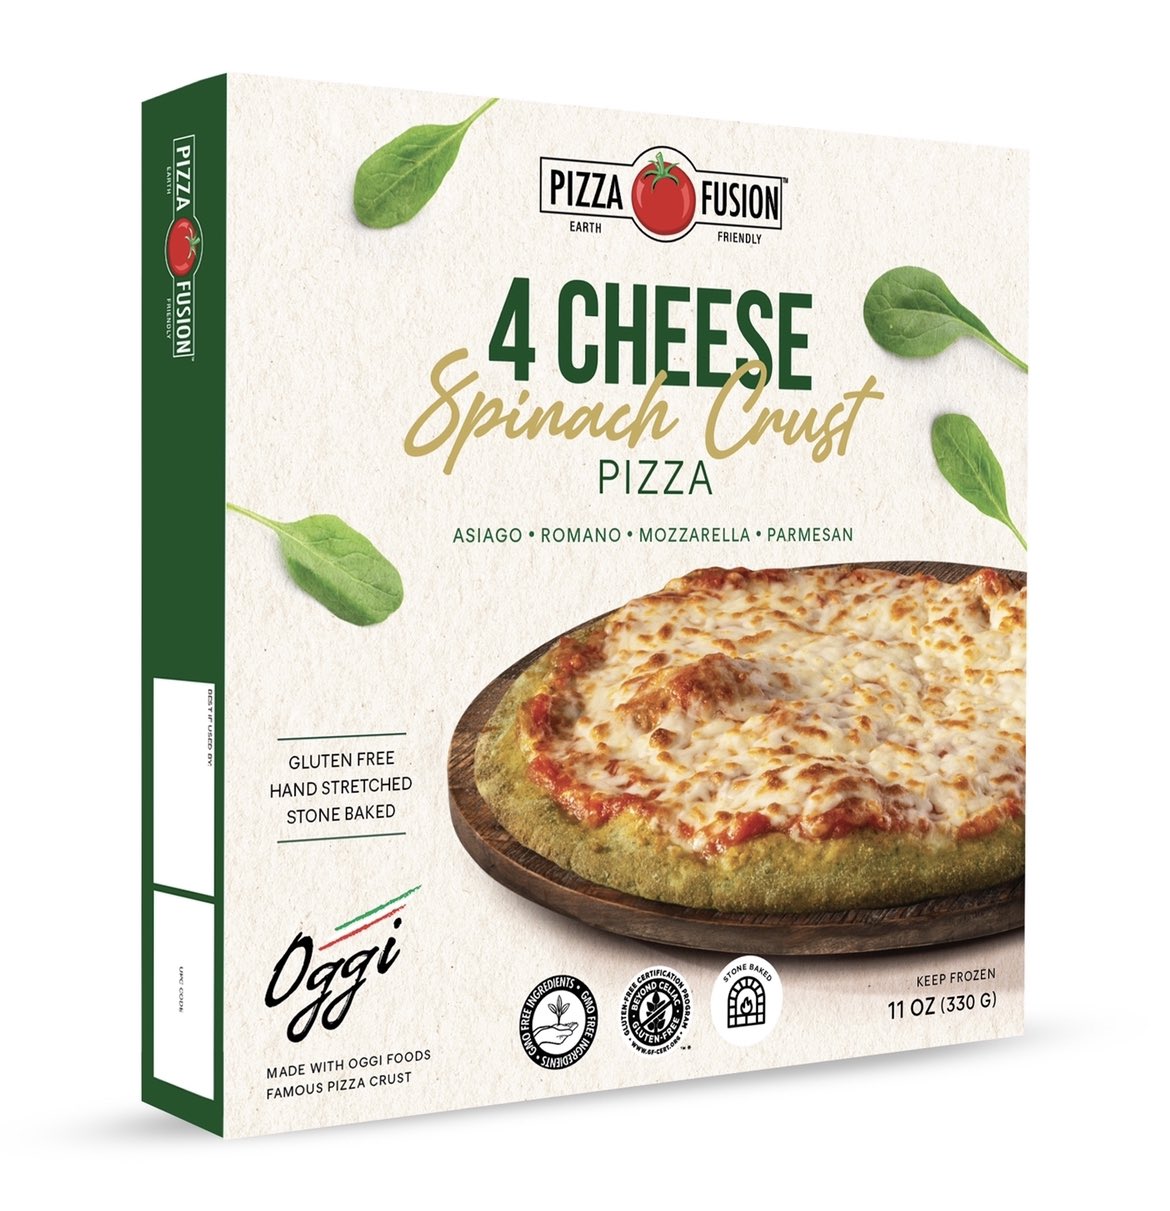 Gourmet Provisions International Corp. (GMPR) Announces Gluten-Free Frozen Pizza to be in 25+ Grocery Stores Within the Week